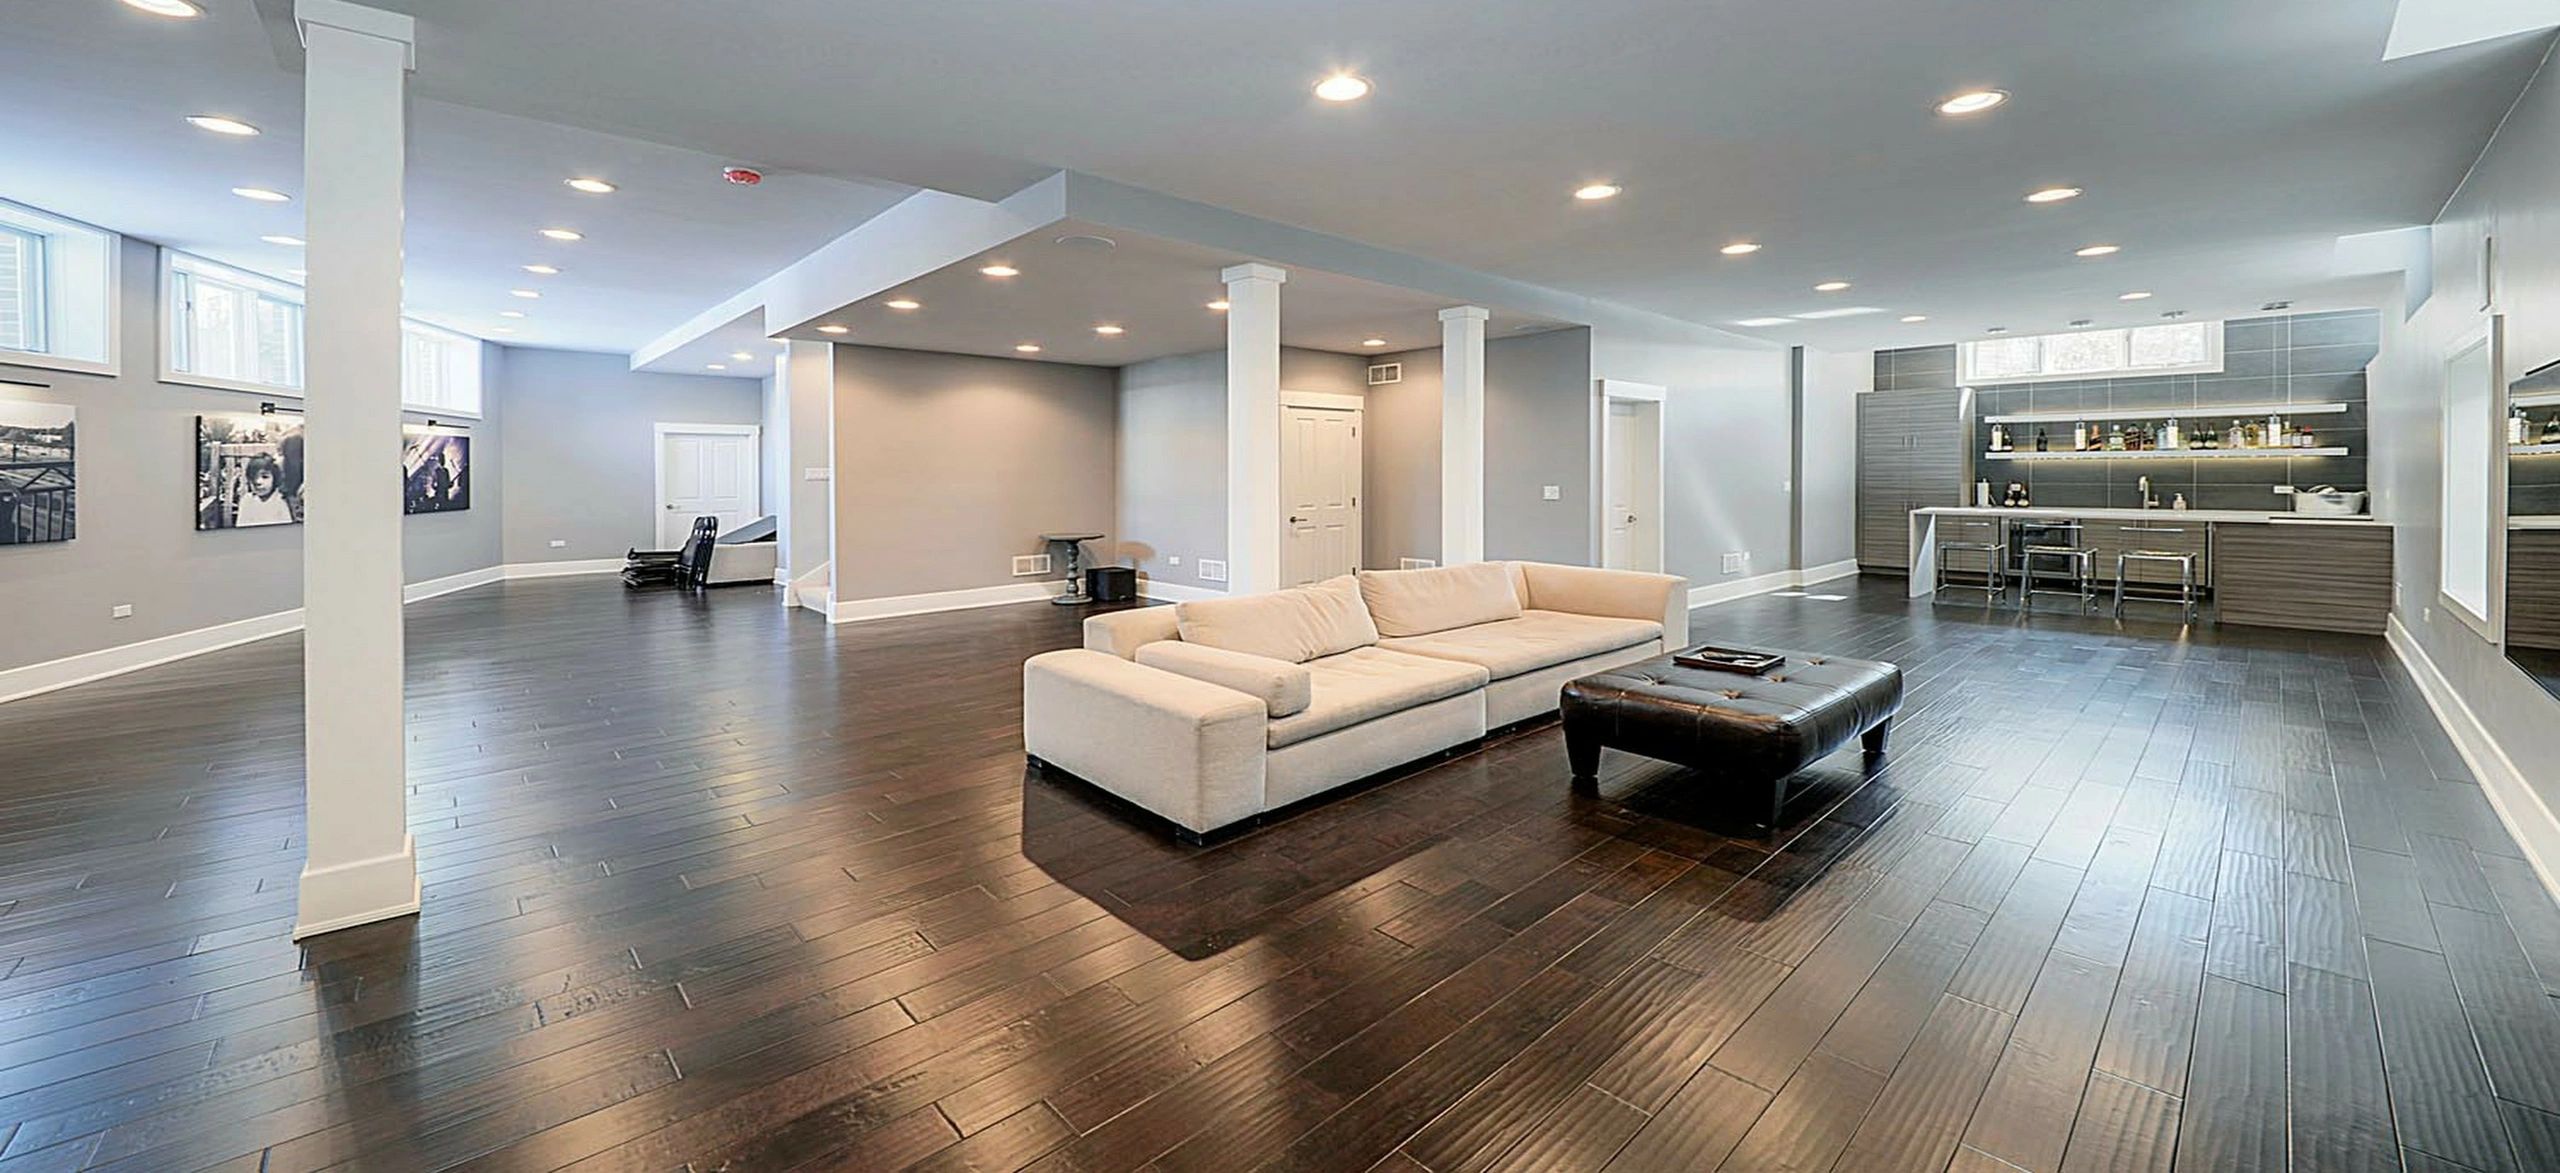 We Specialize in Basement Remodeling in Buffalo, New York